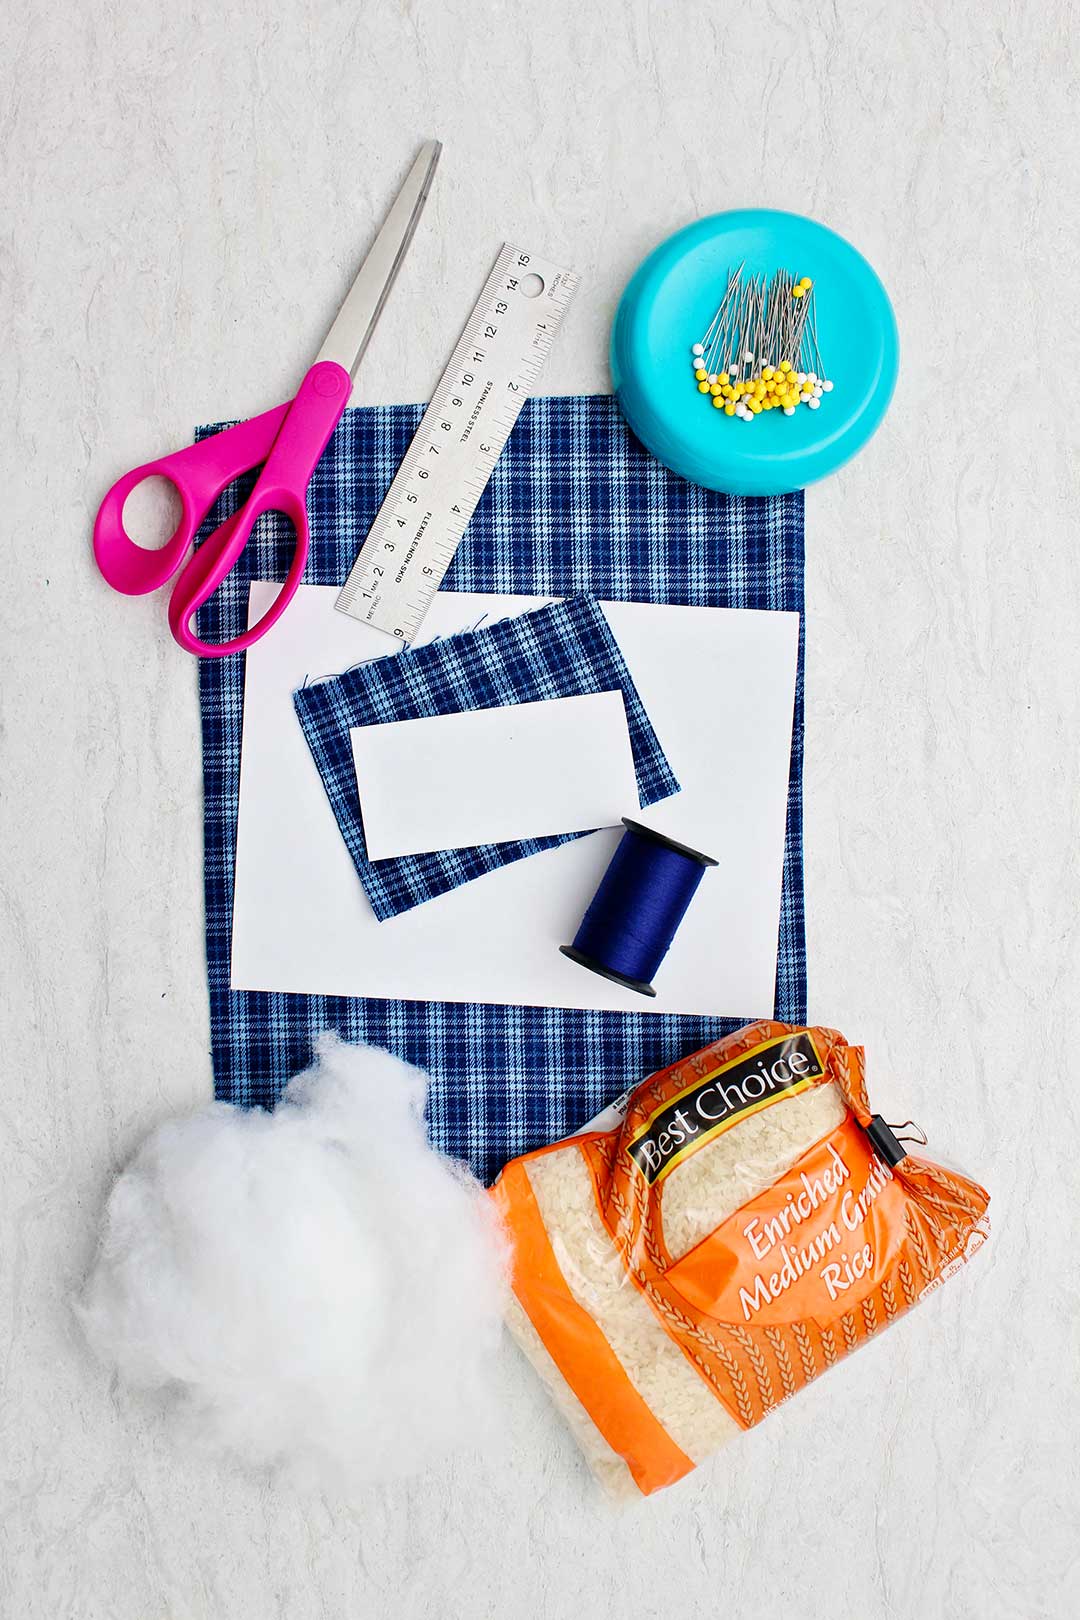 Supplies needed to make Cell Phone Holder Pillow. Scissors, ruler, straight pins, fabric, thread, dried rice and cotton.